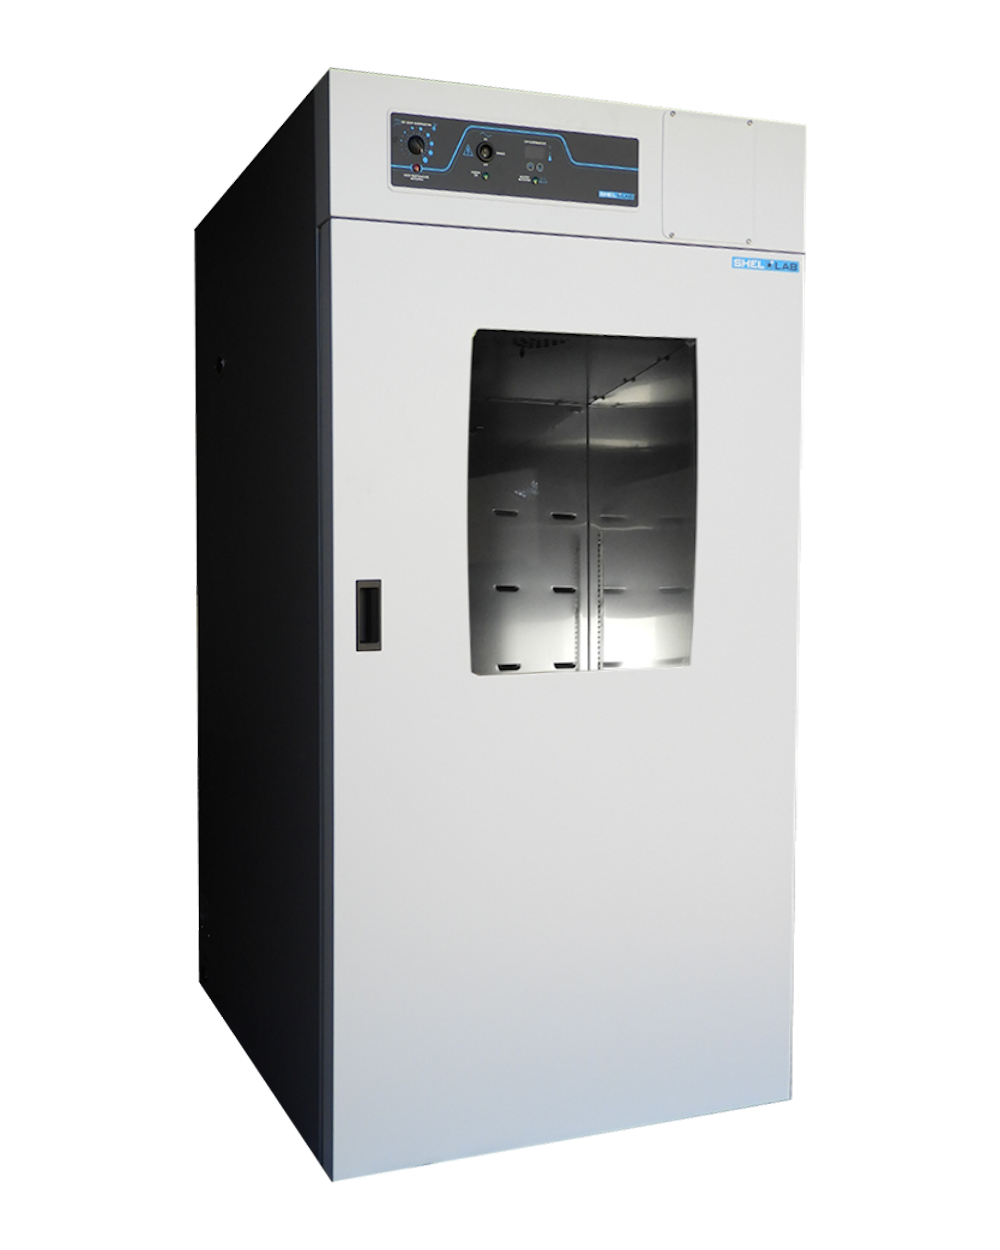 So-Low To 70ºC, 31.8 cu. ft. Large Capacity, 115v